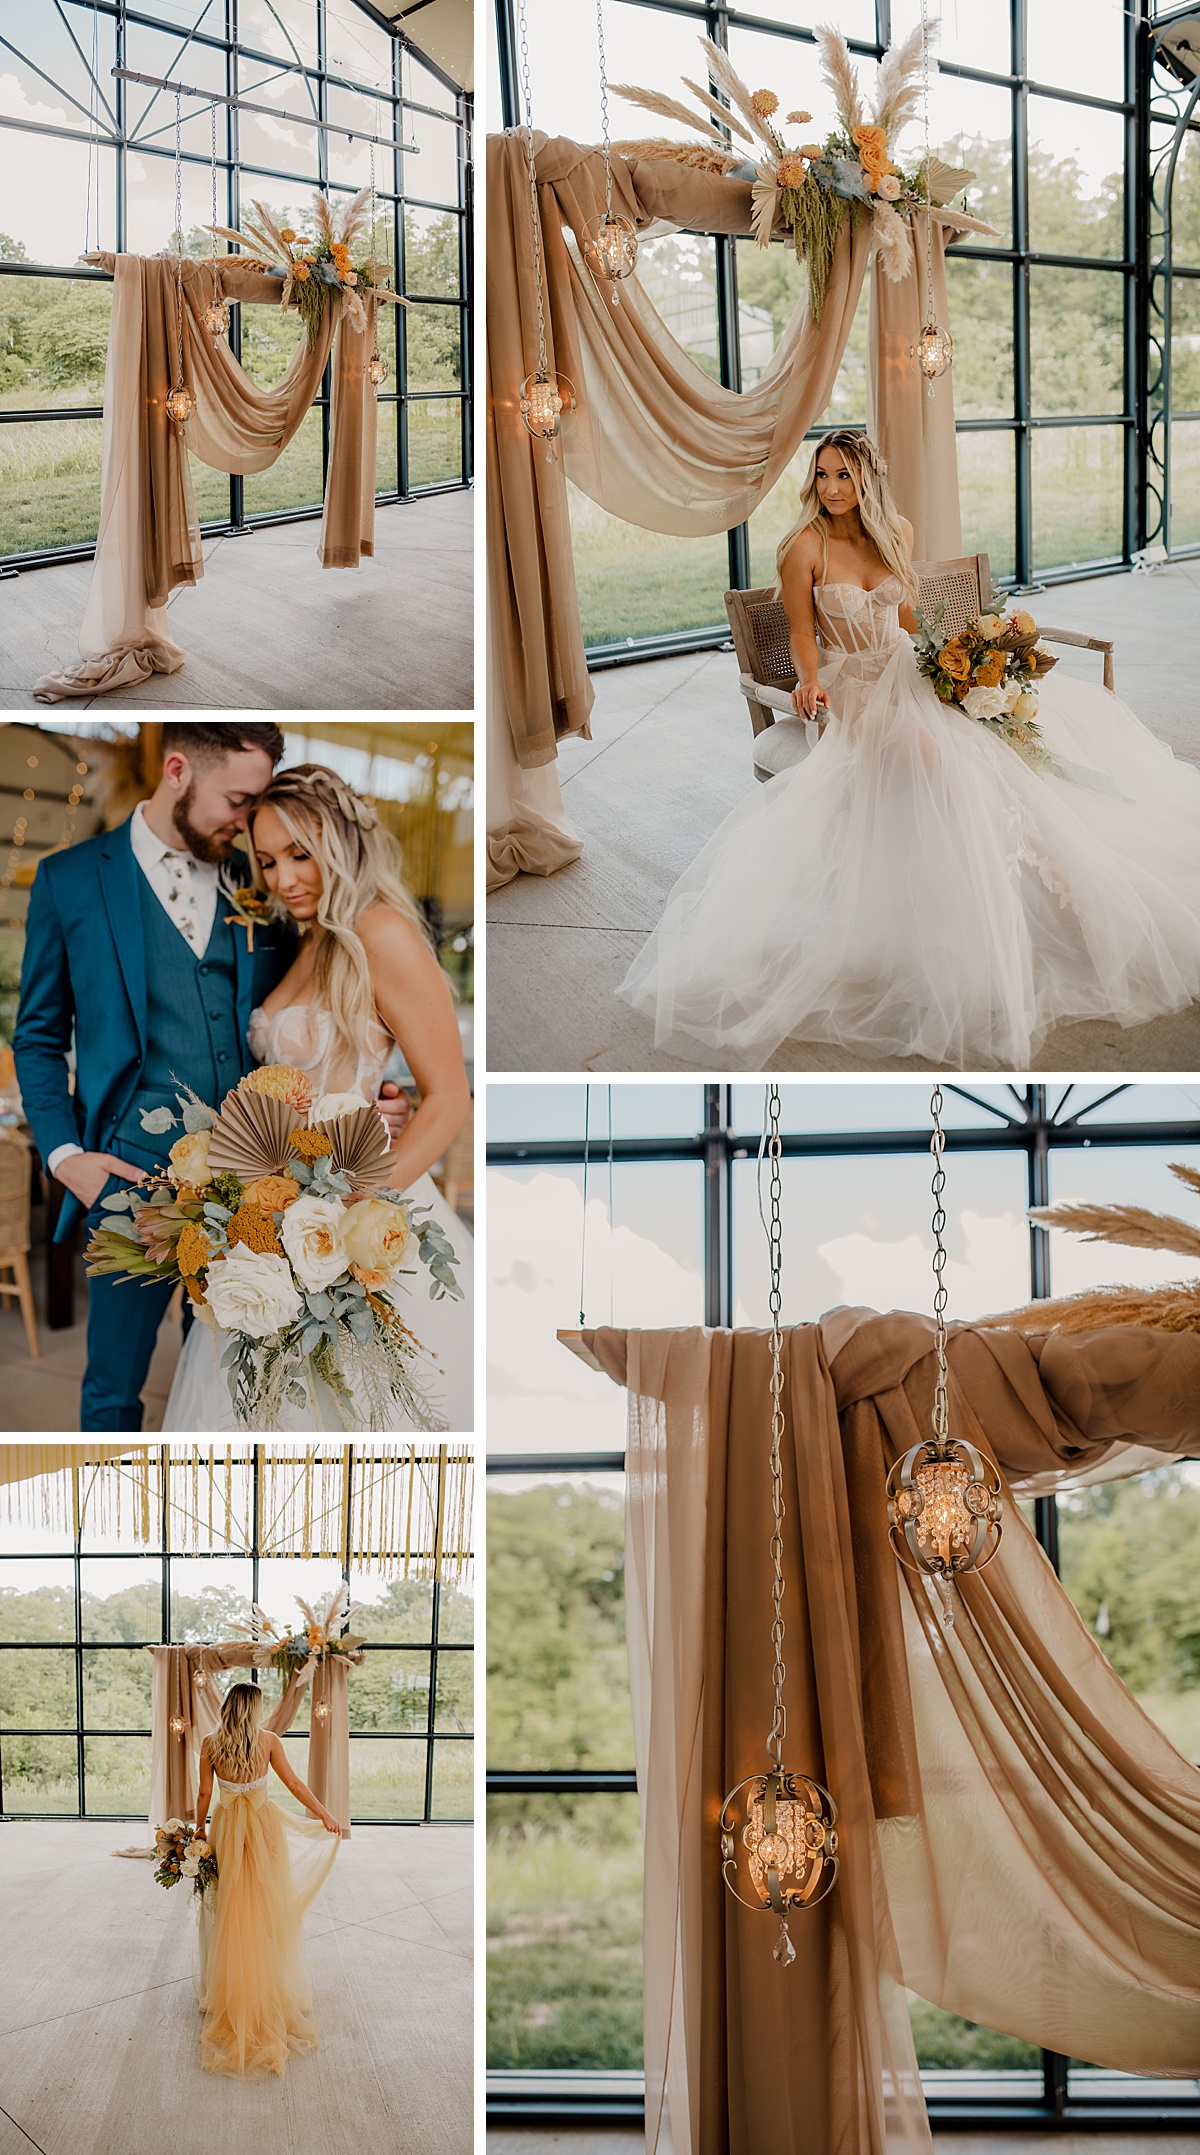 Colorful boho wedding design inspiration at the A-Vent Orangery in Kansas City.